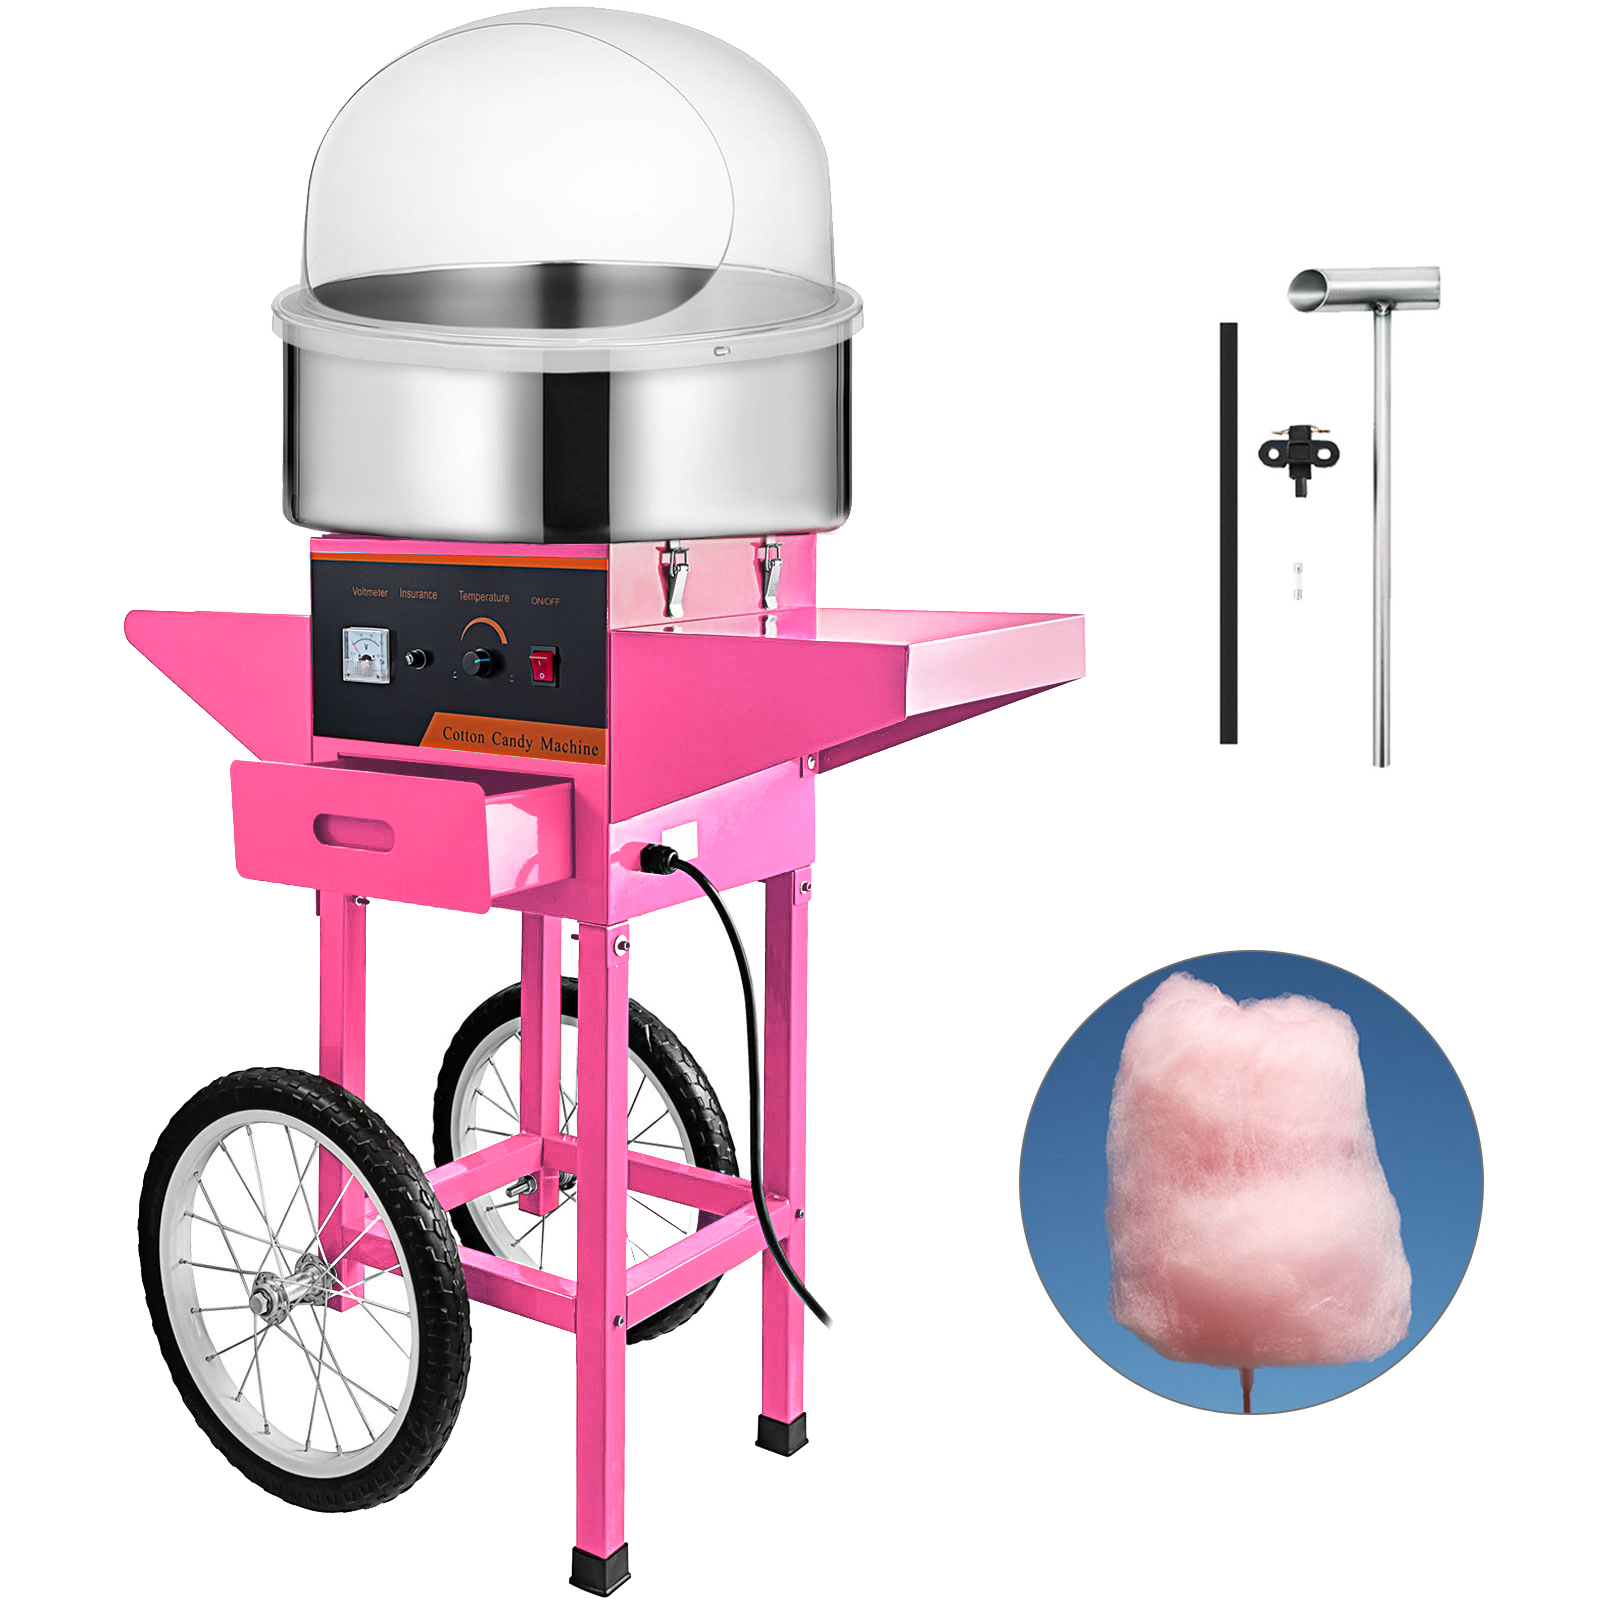 cotton candy machine with cart, pink, 20 inch